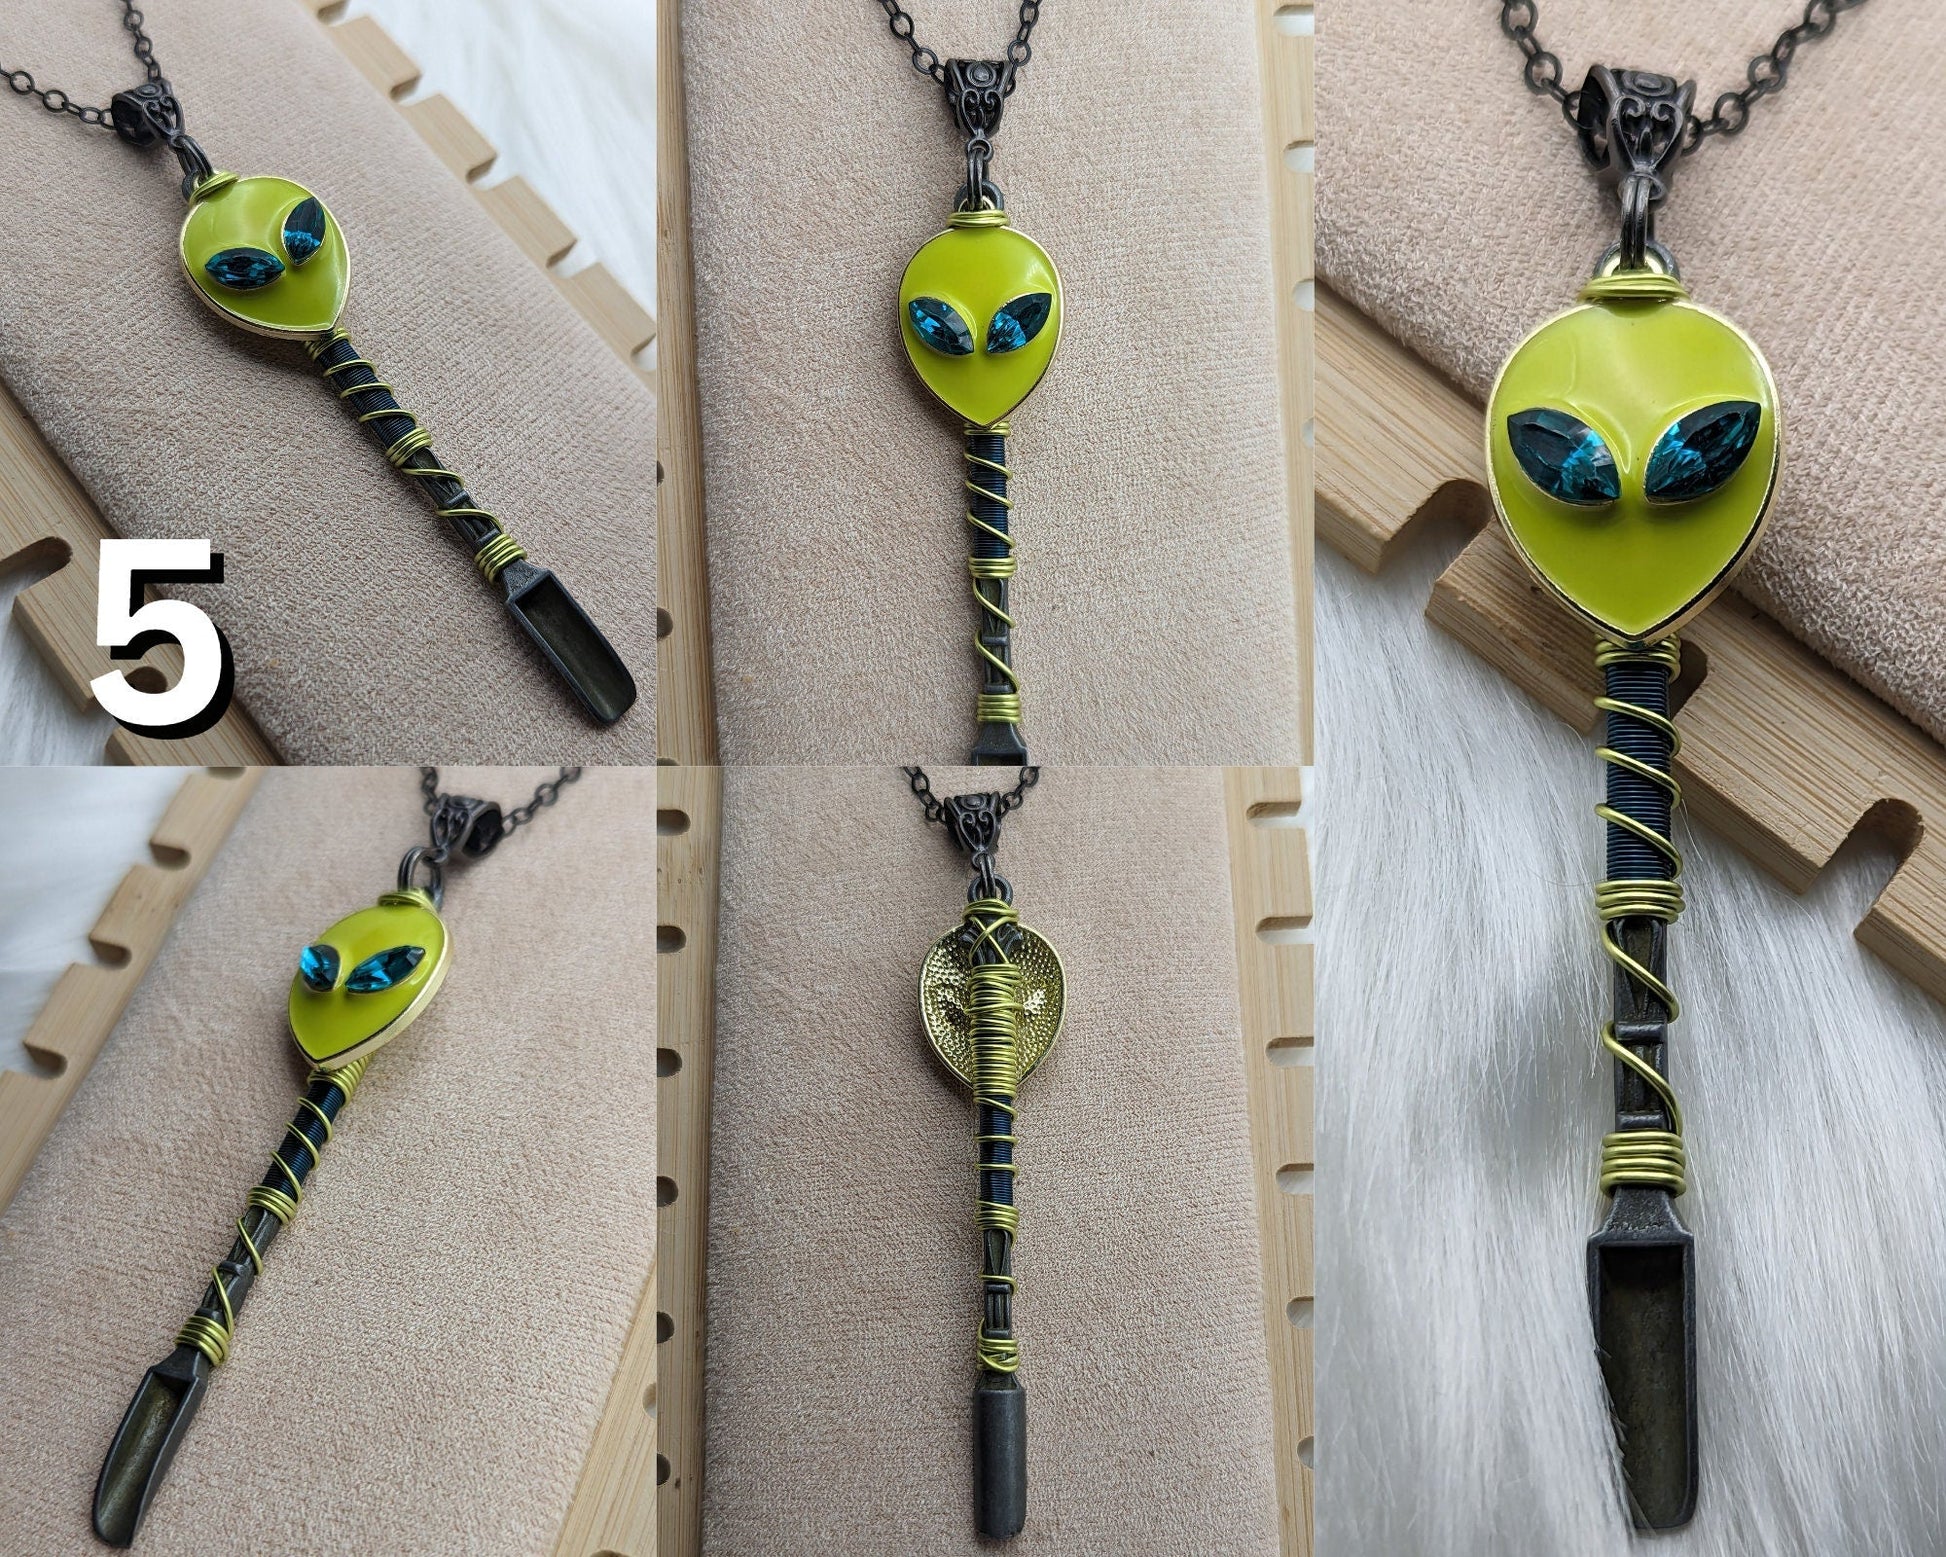 Jeweled Alien Wire Wrapped Mini Spoons - Groove Spoons